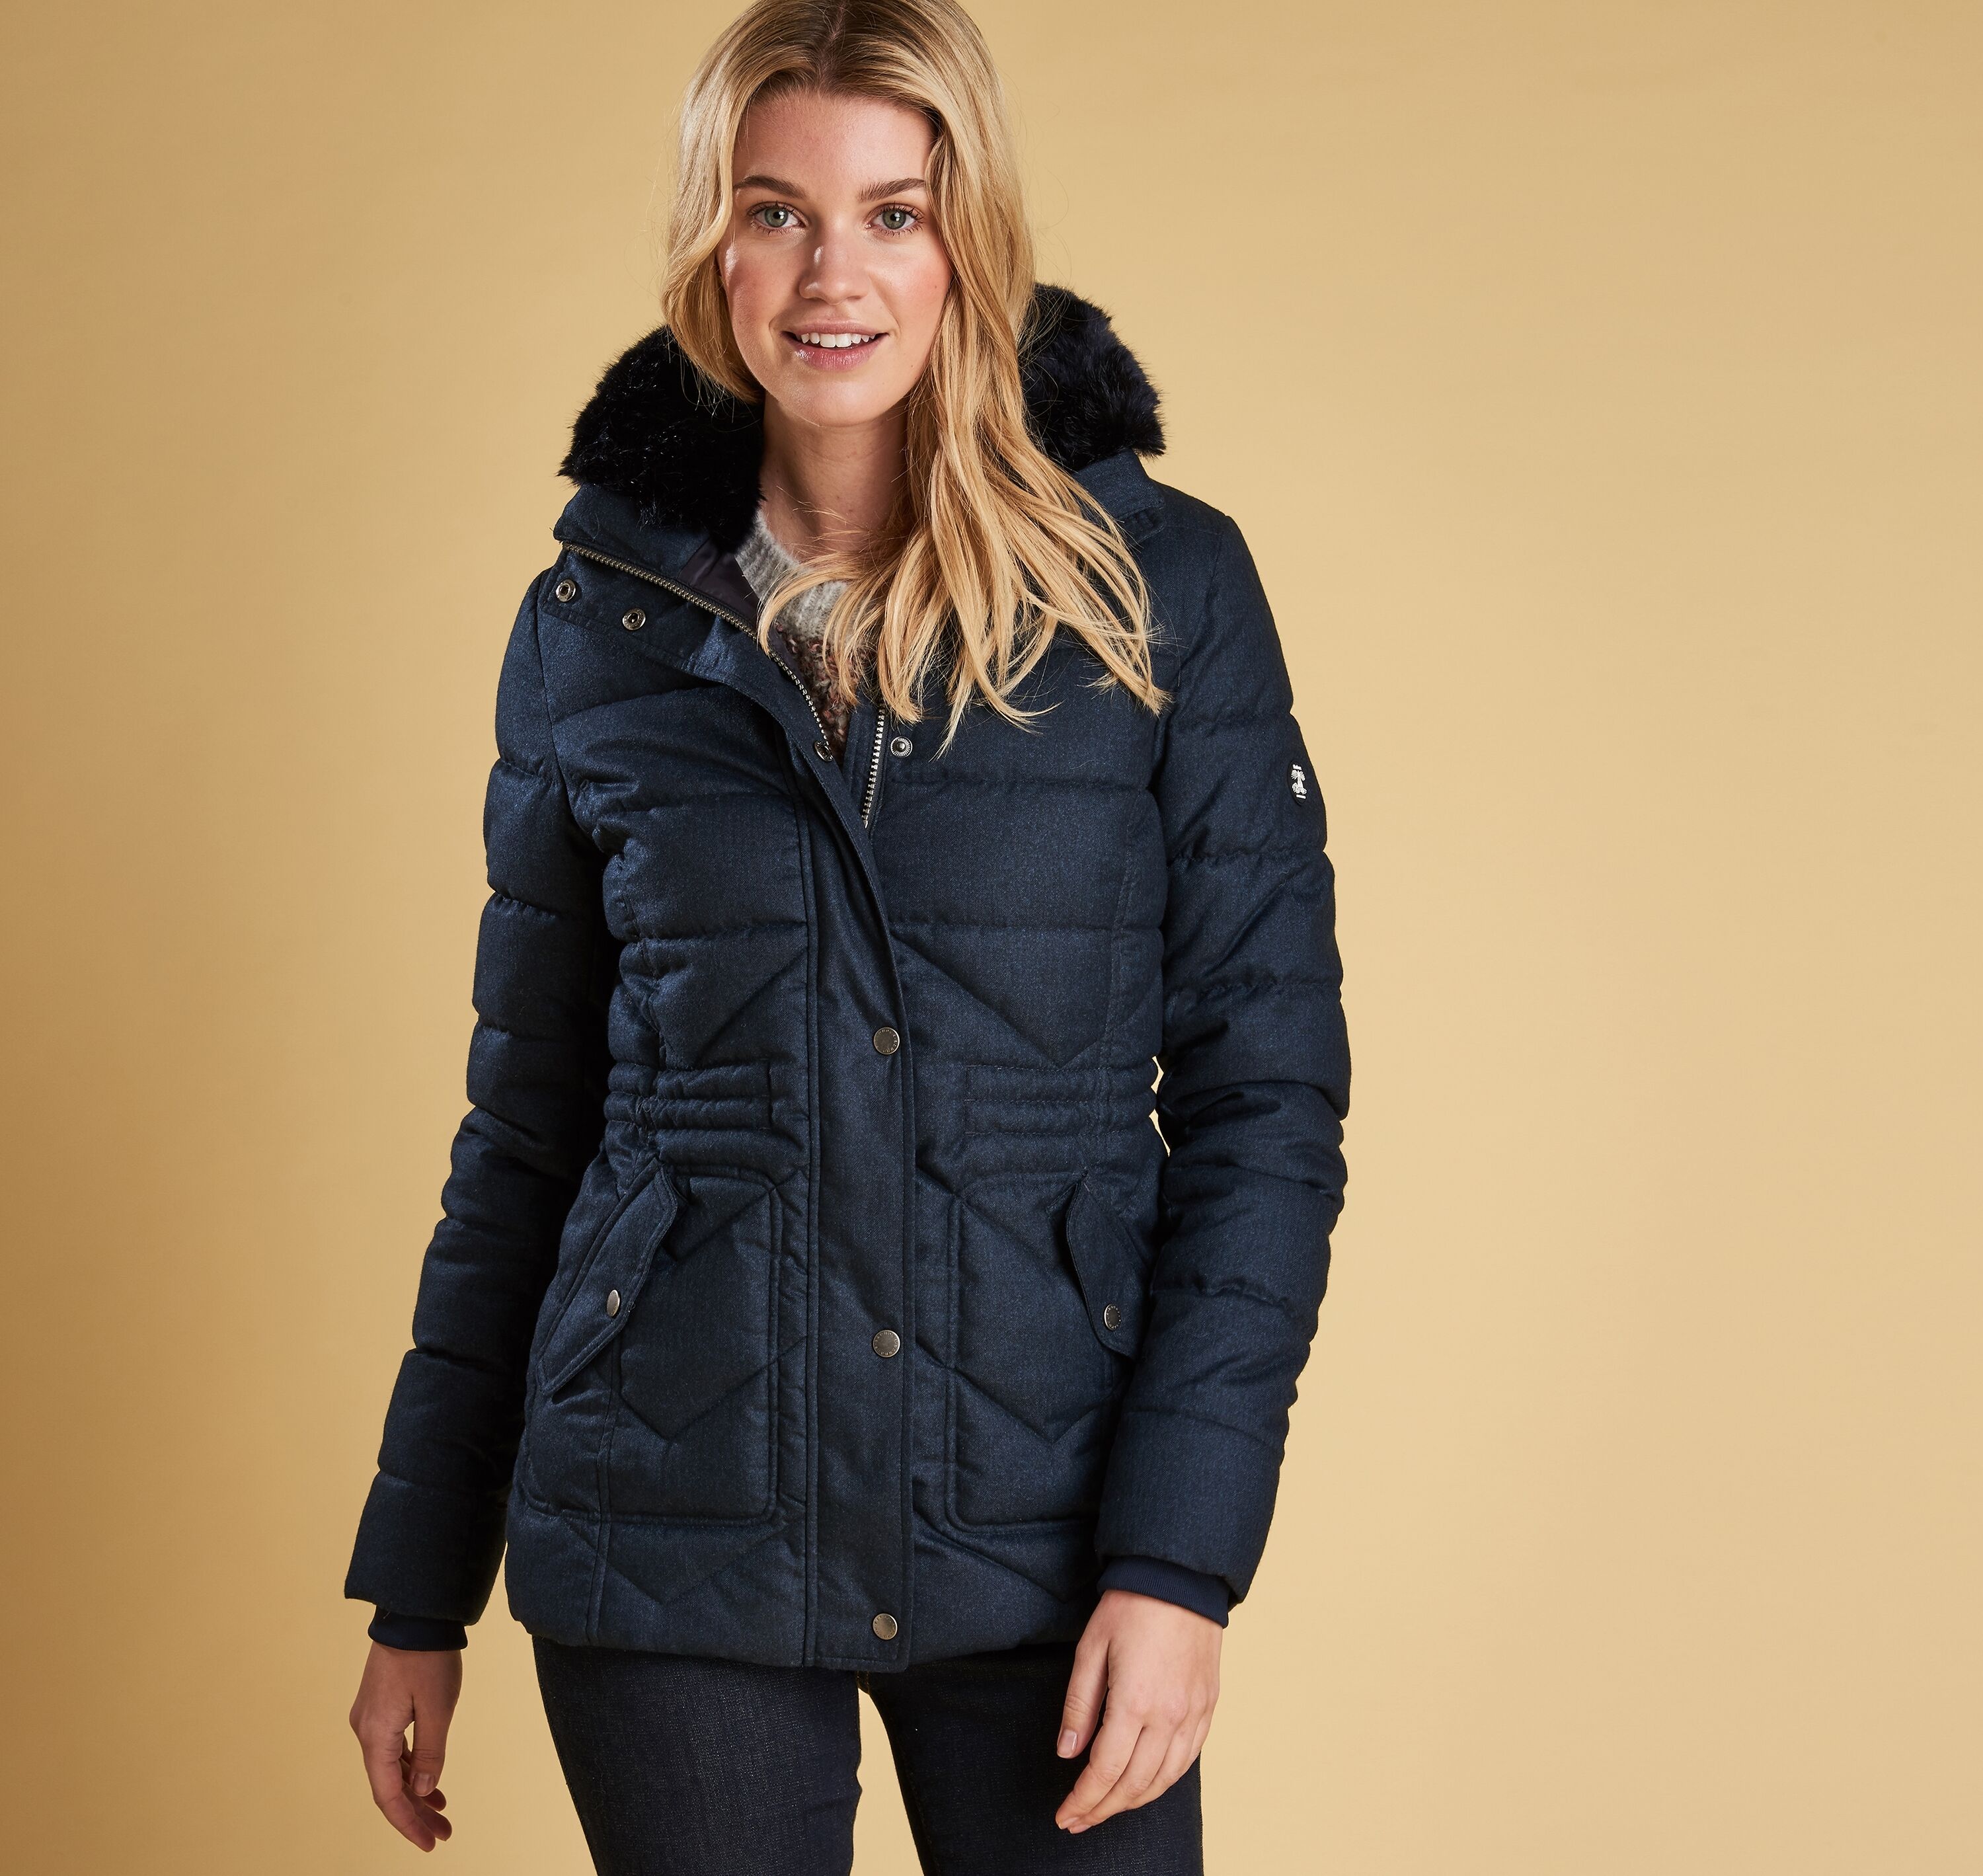 barbour navy quilted jacket womens